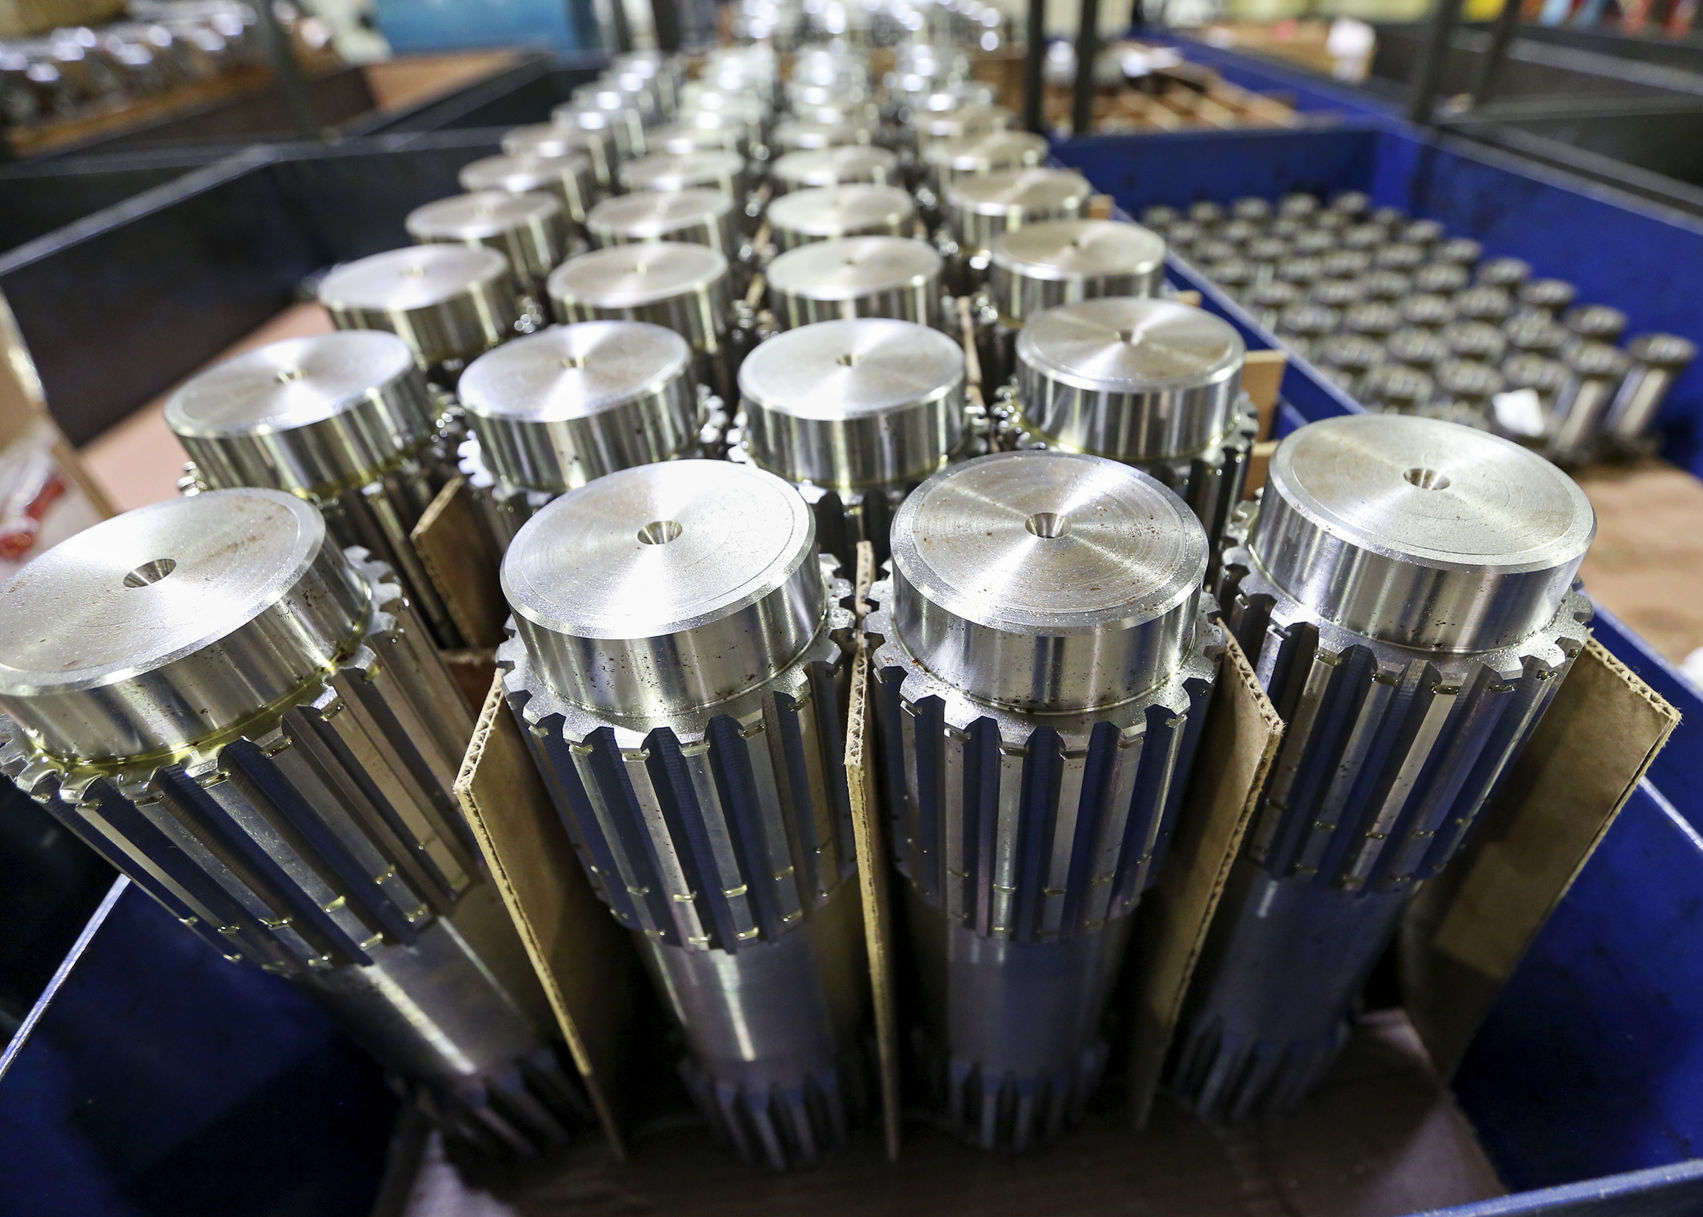 Gears manufactured at The Adams Company in Dubuque.    PHOTO CREDIT: Nicki Kohl
Telegraph Herald